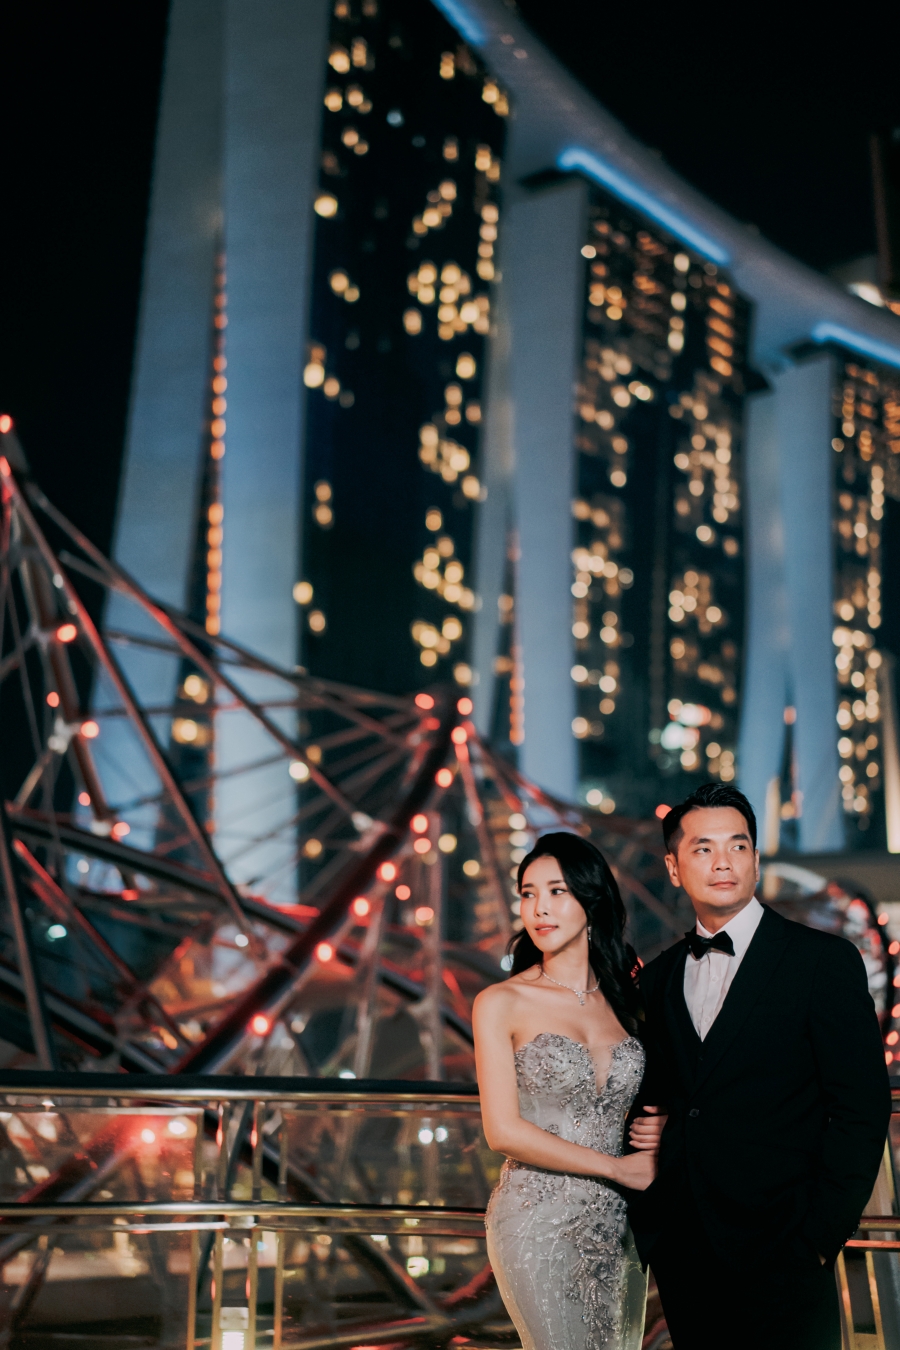 Singapore Pre-Wedding Photoshoot At Cloud Forest, Fort Canning Spiral Staircase And Marina Bay For Korean Couple  by Michael  on OneThreeOneFour 10